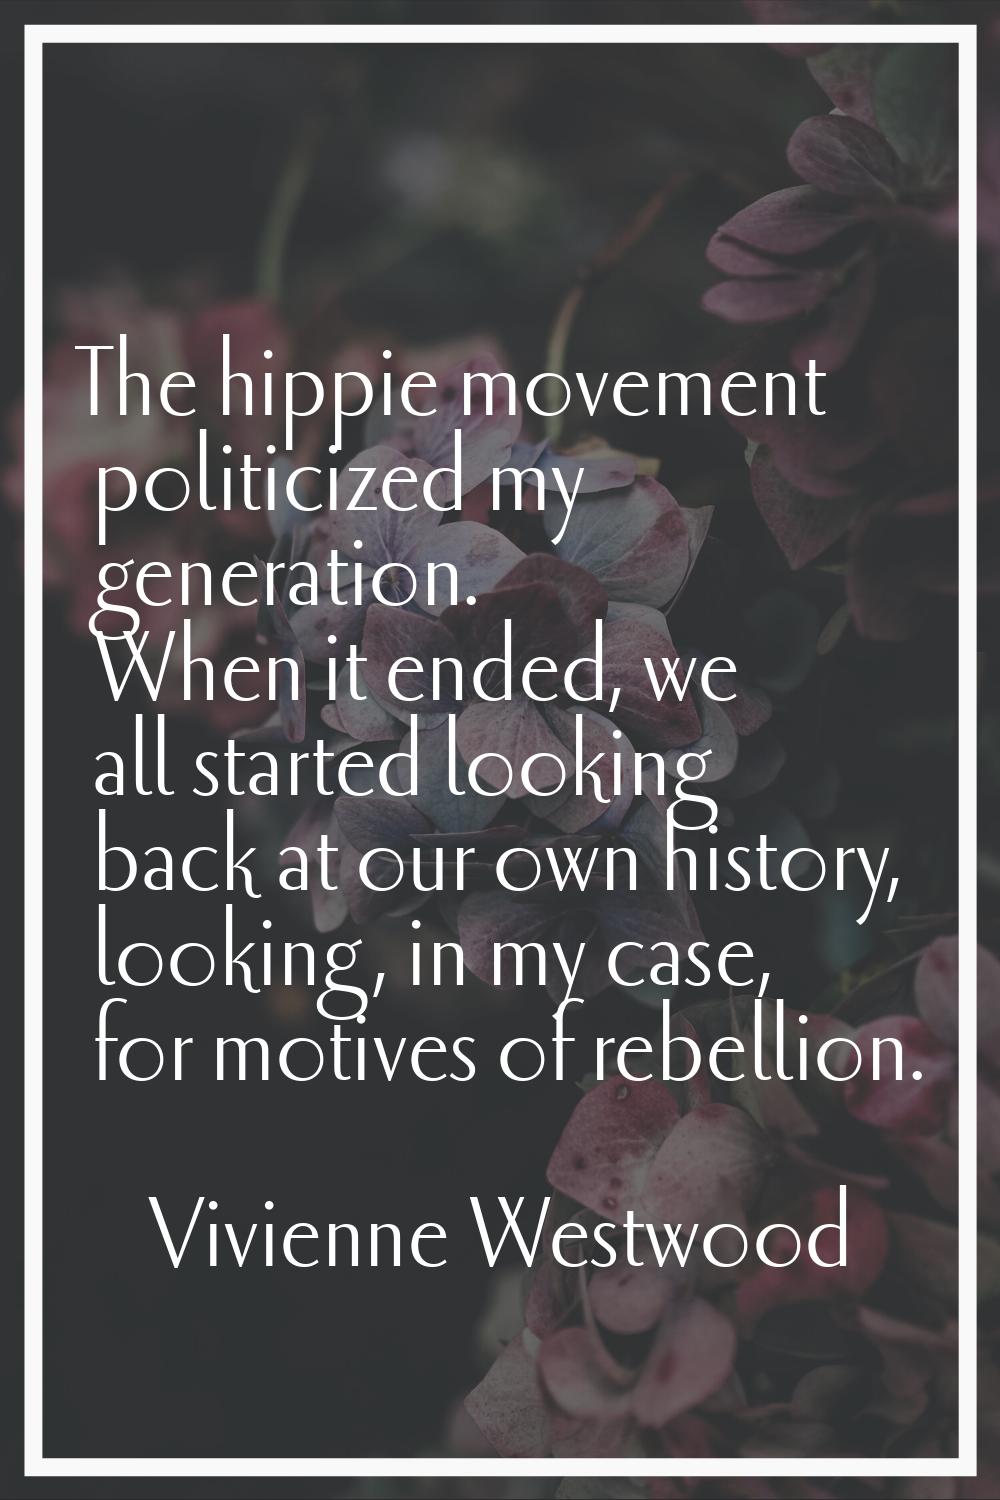 The hippie movement politicized my generation. When it ended, we all started looking back at our ow